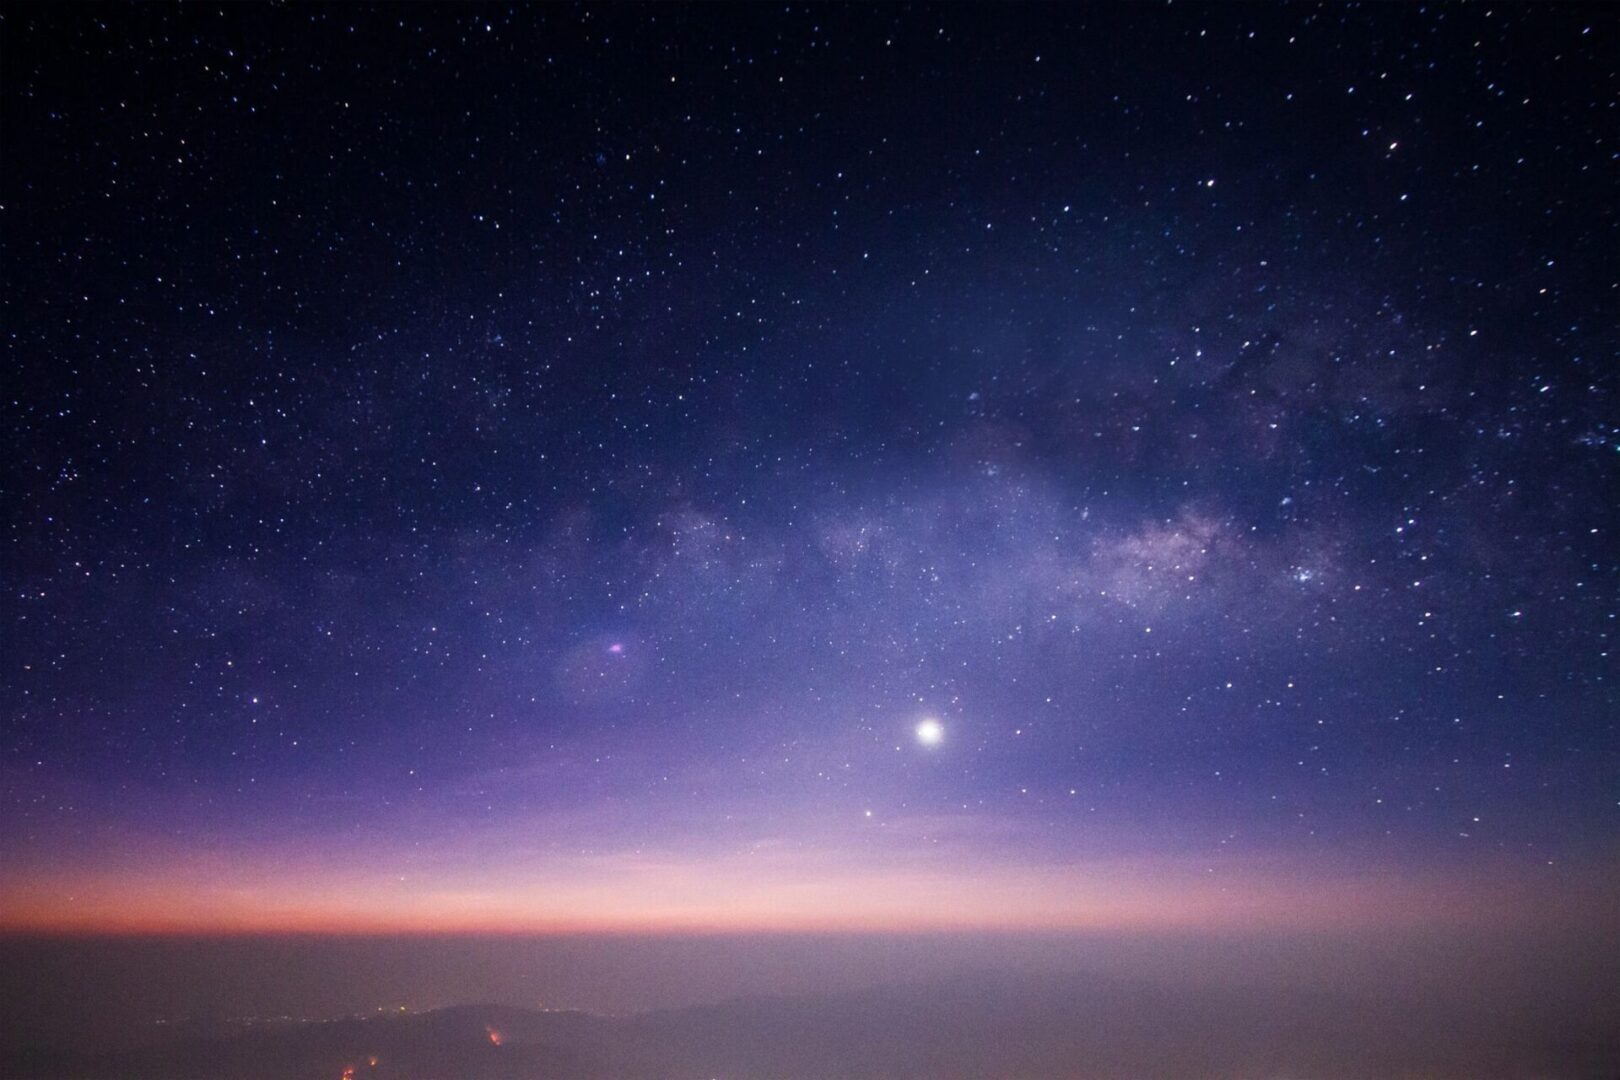 A view of the sky at night from an airplane.